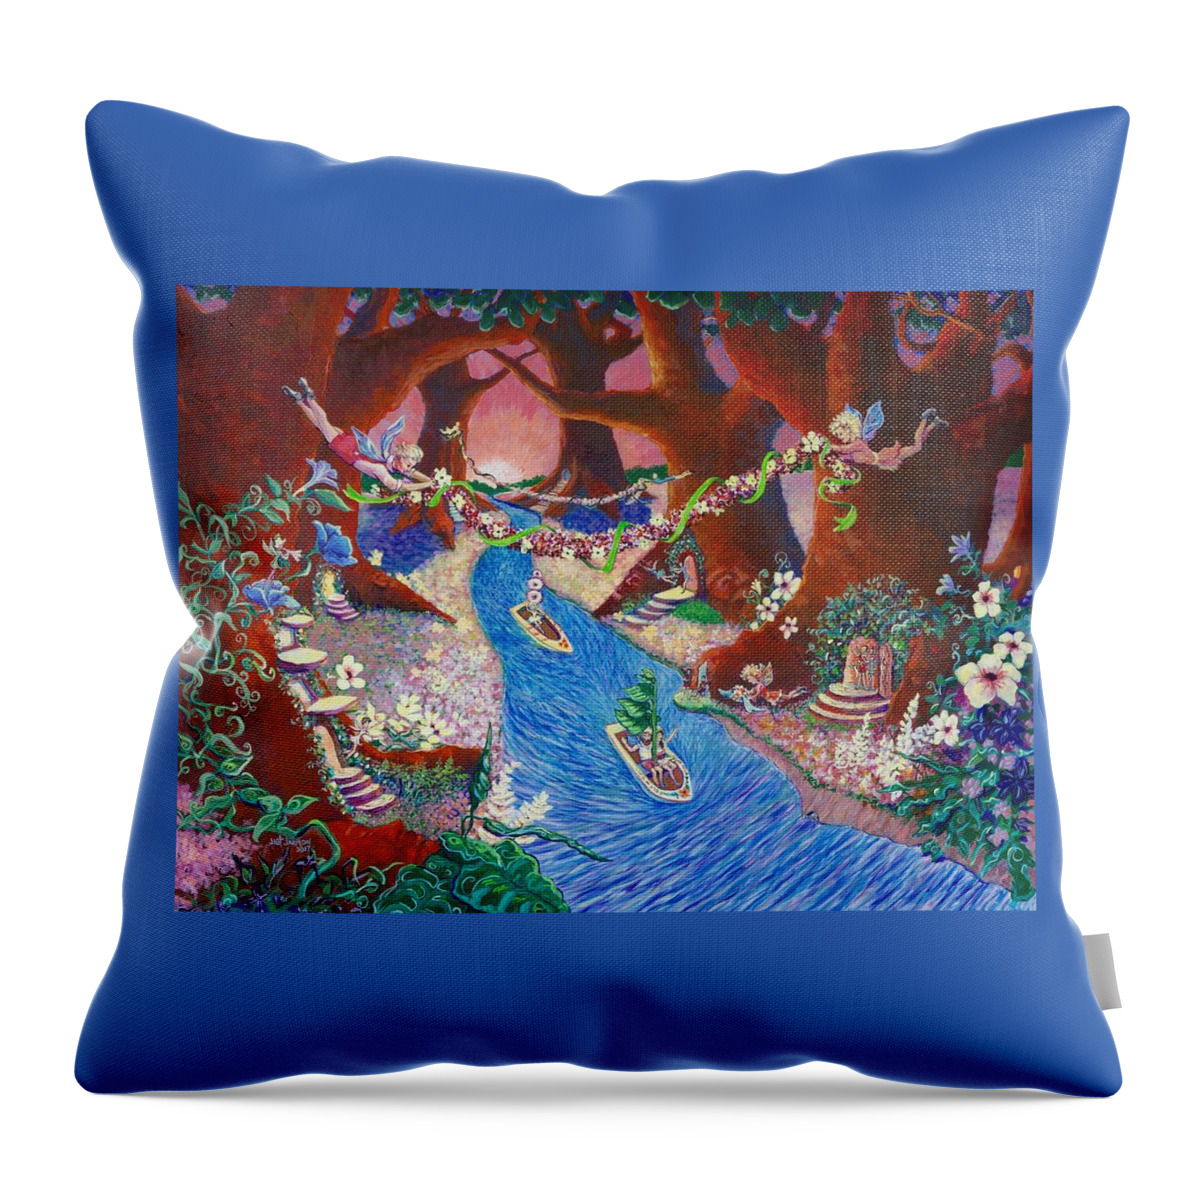 Fairies Throw Pillow featuring the painting Creekside Fairy Celebration by Jeanette Jarmon